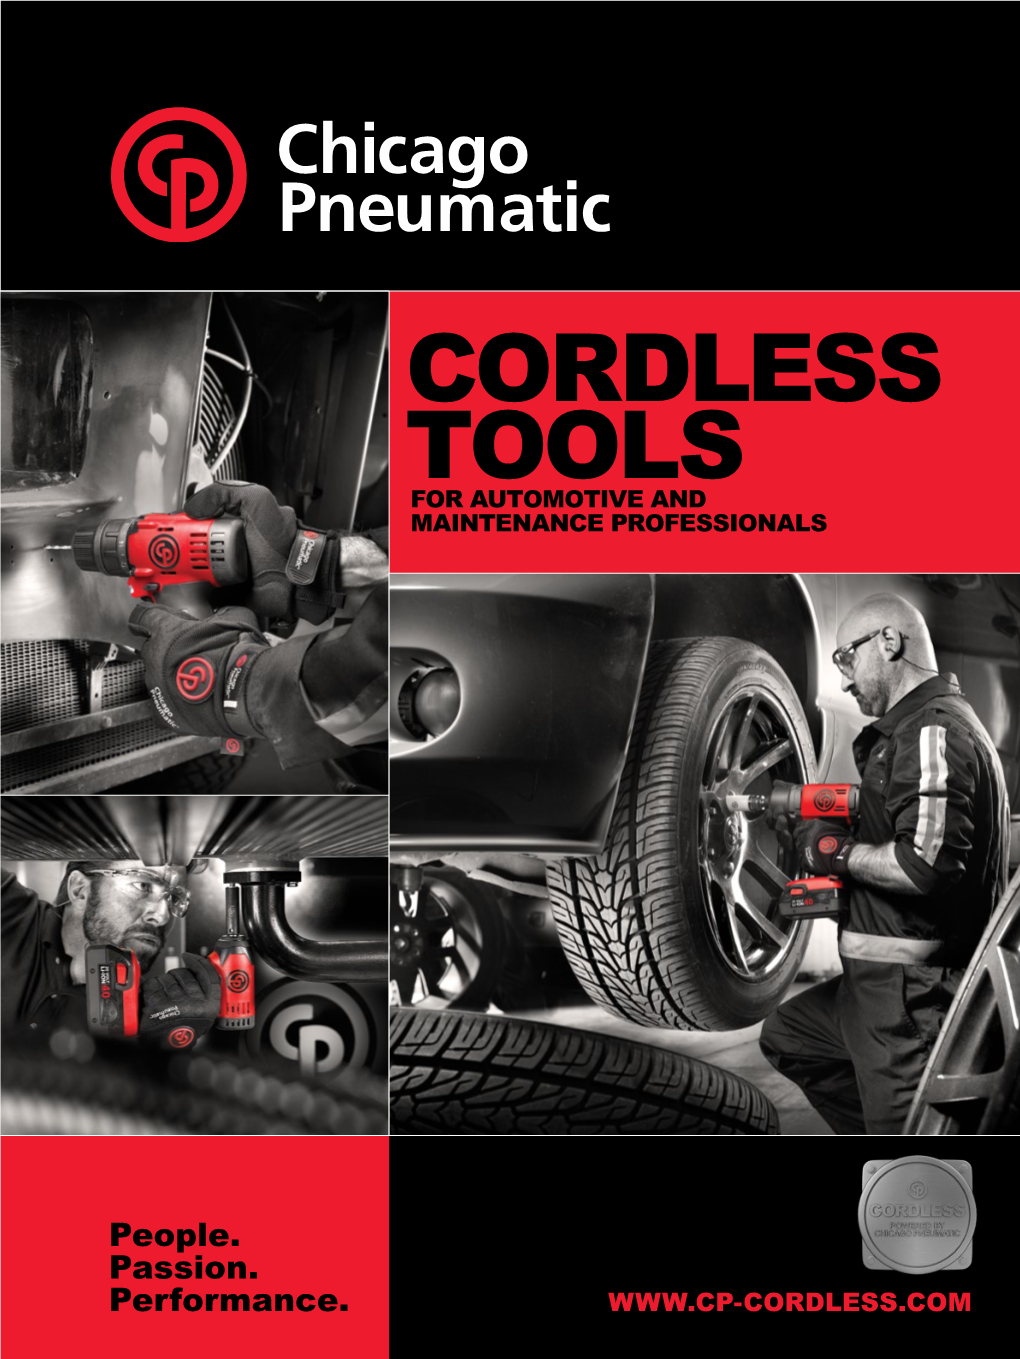 CP Cordless Tools Come with the Better Battery in the Business